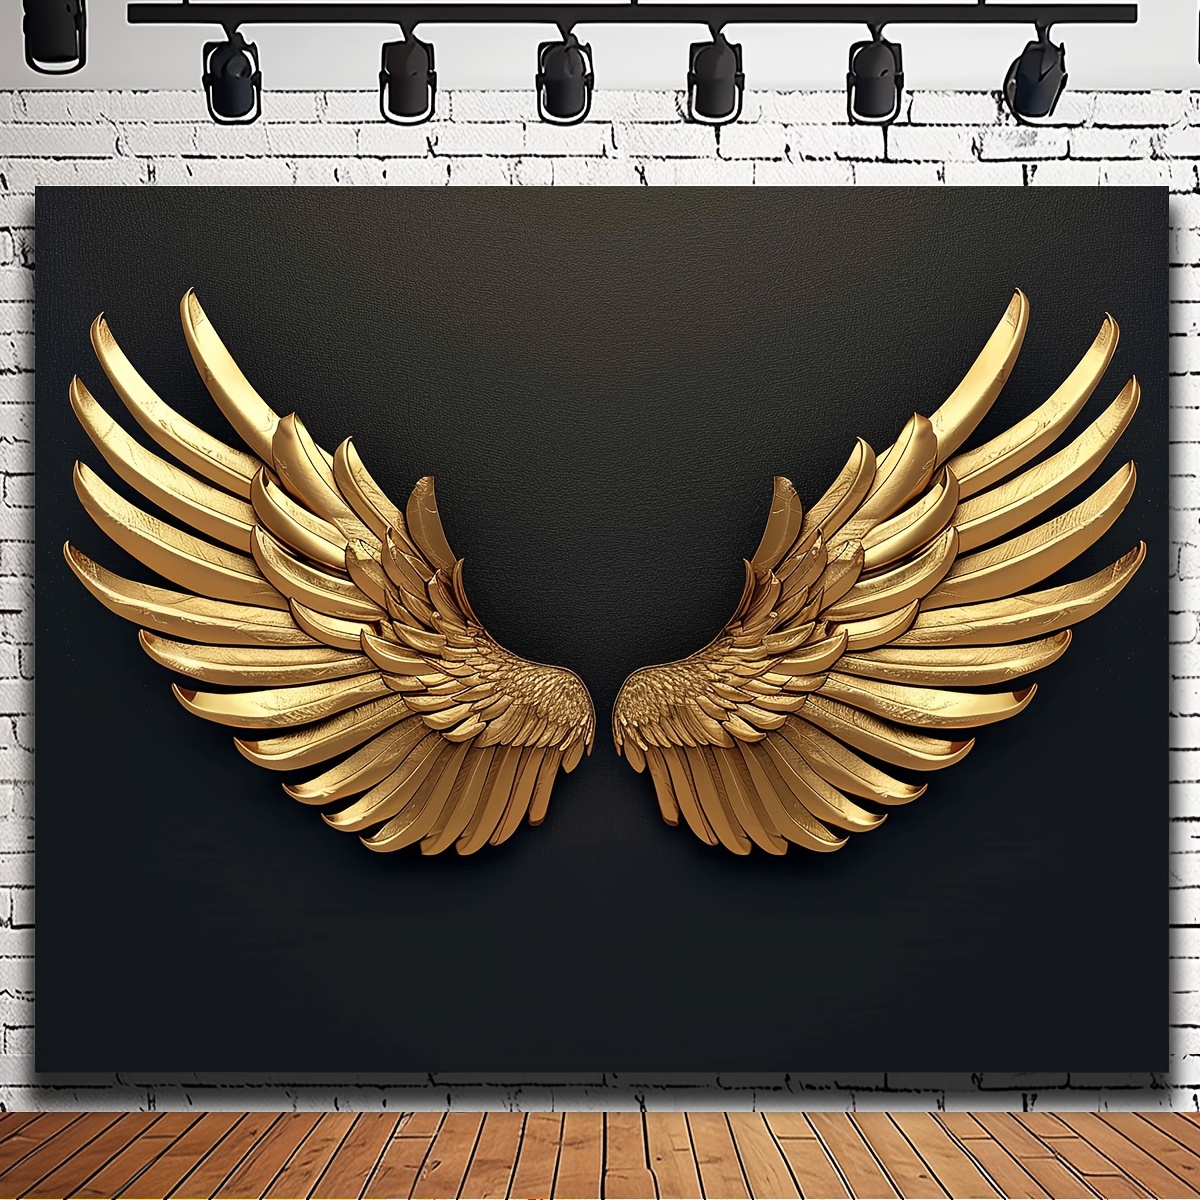 

1pc, Background Golden Wings Backdrop Elegant Black Photography Background Fashion Show Photo Portrait Backdrop Photo Booth Props, Party Decor Supplies, Home Wall Decor Supplies Indoor Outdoor Decor